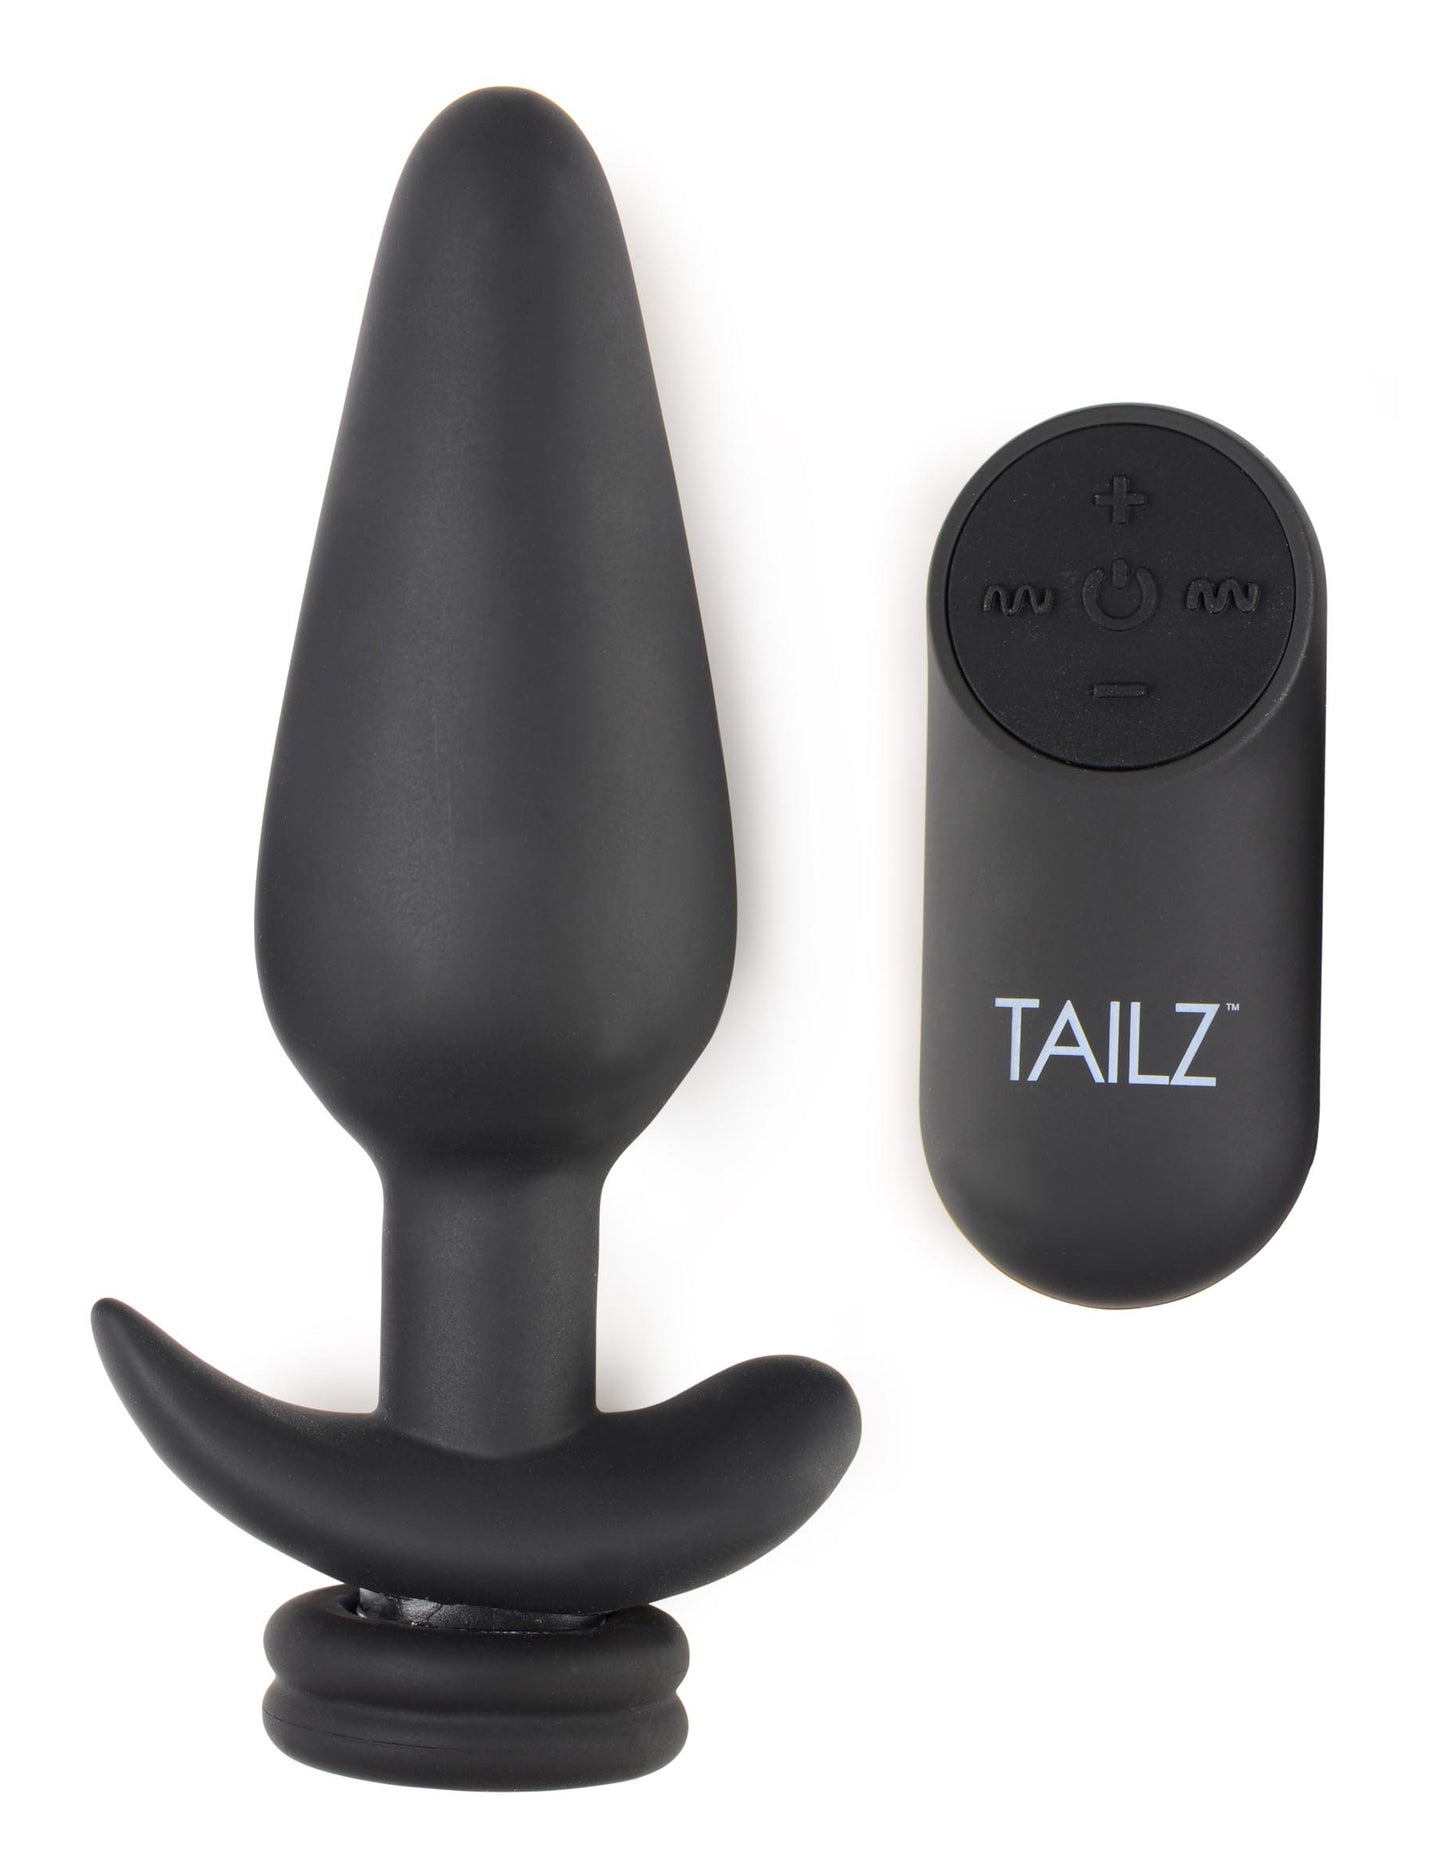 Large Vibrating Anal Plug with Interchangeable Fox Tail - Black and White - UABDSM